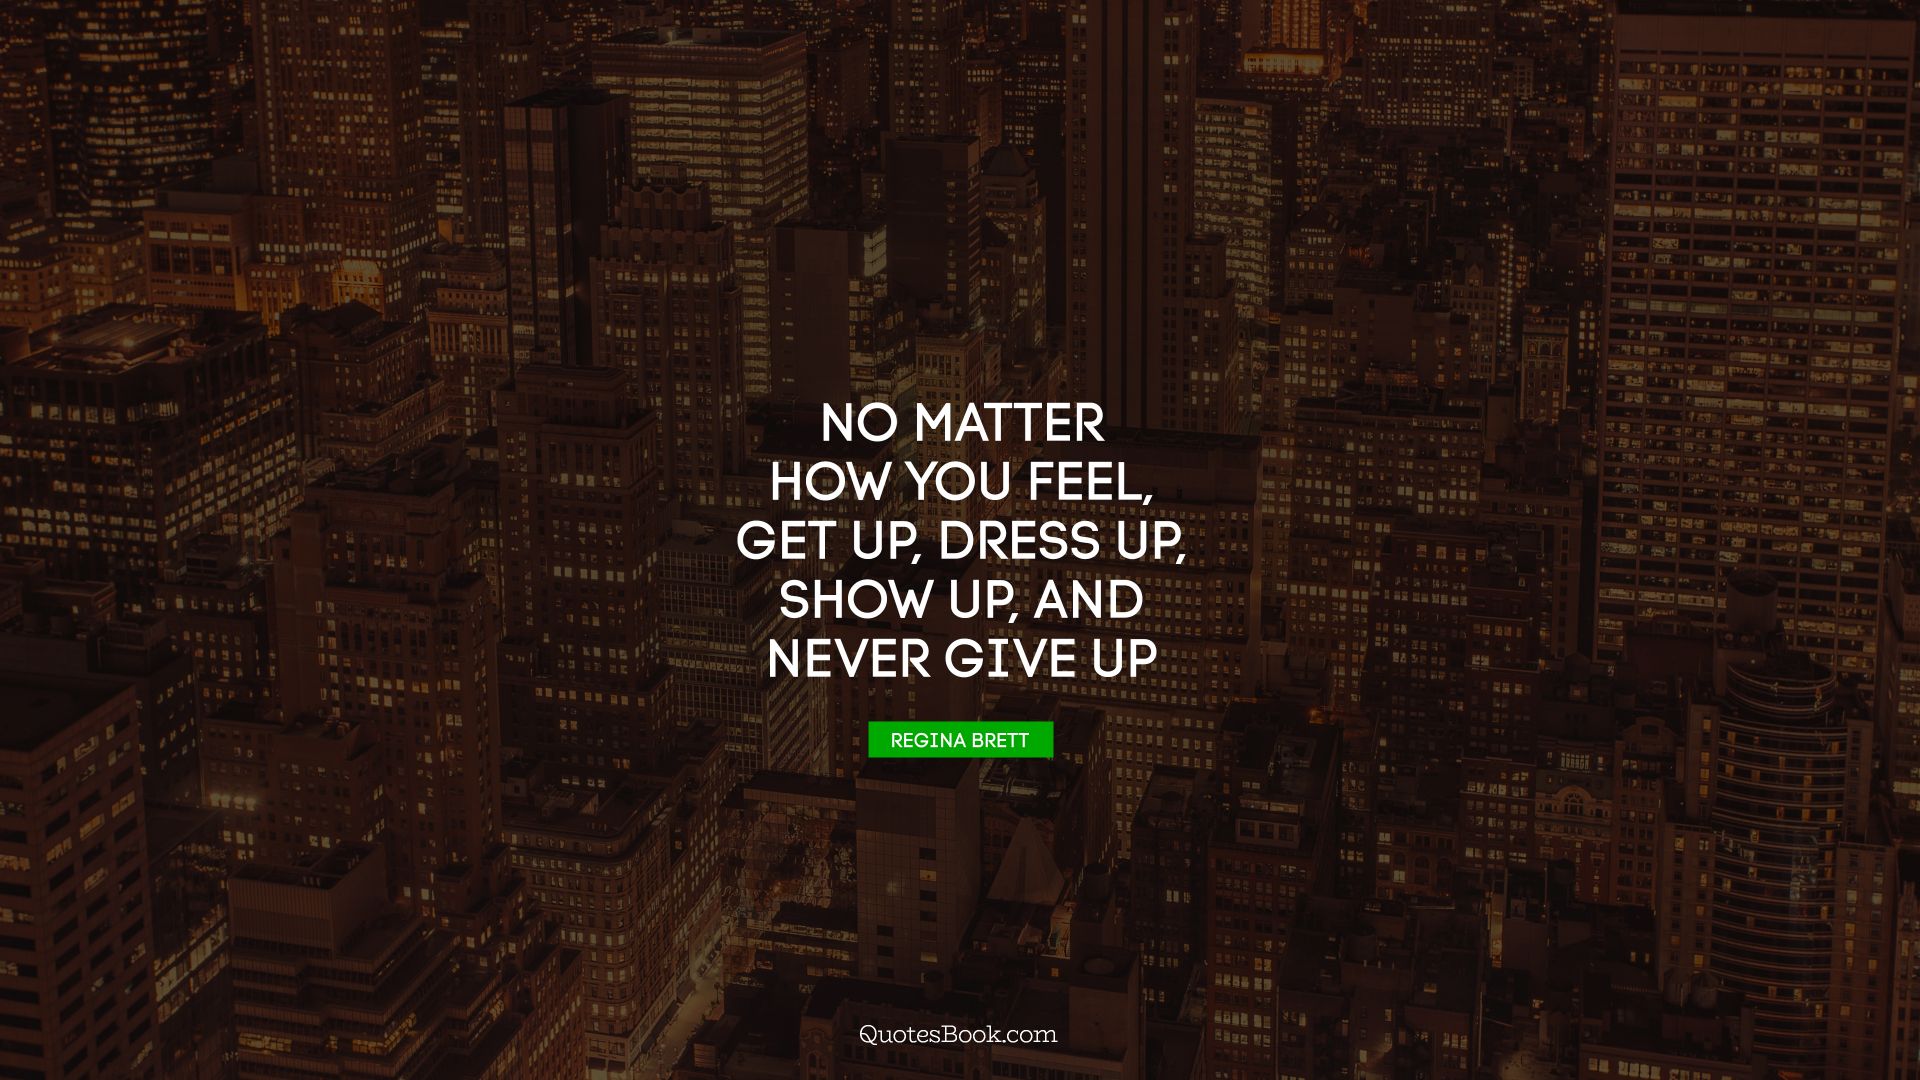 No matter how you feel, get up, dress up, show up, and never give up. - Quote by Regina Brett